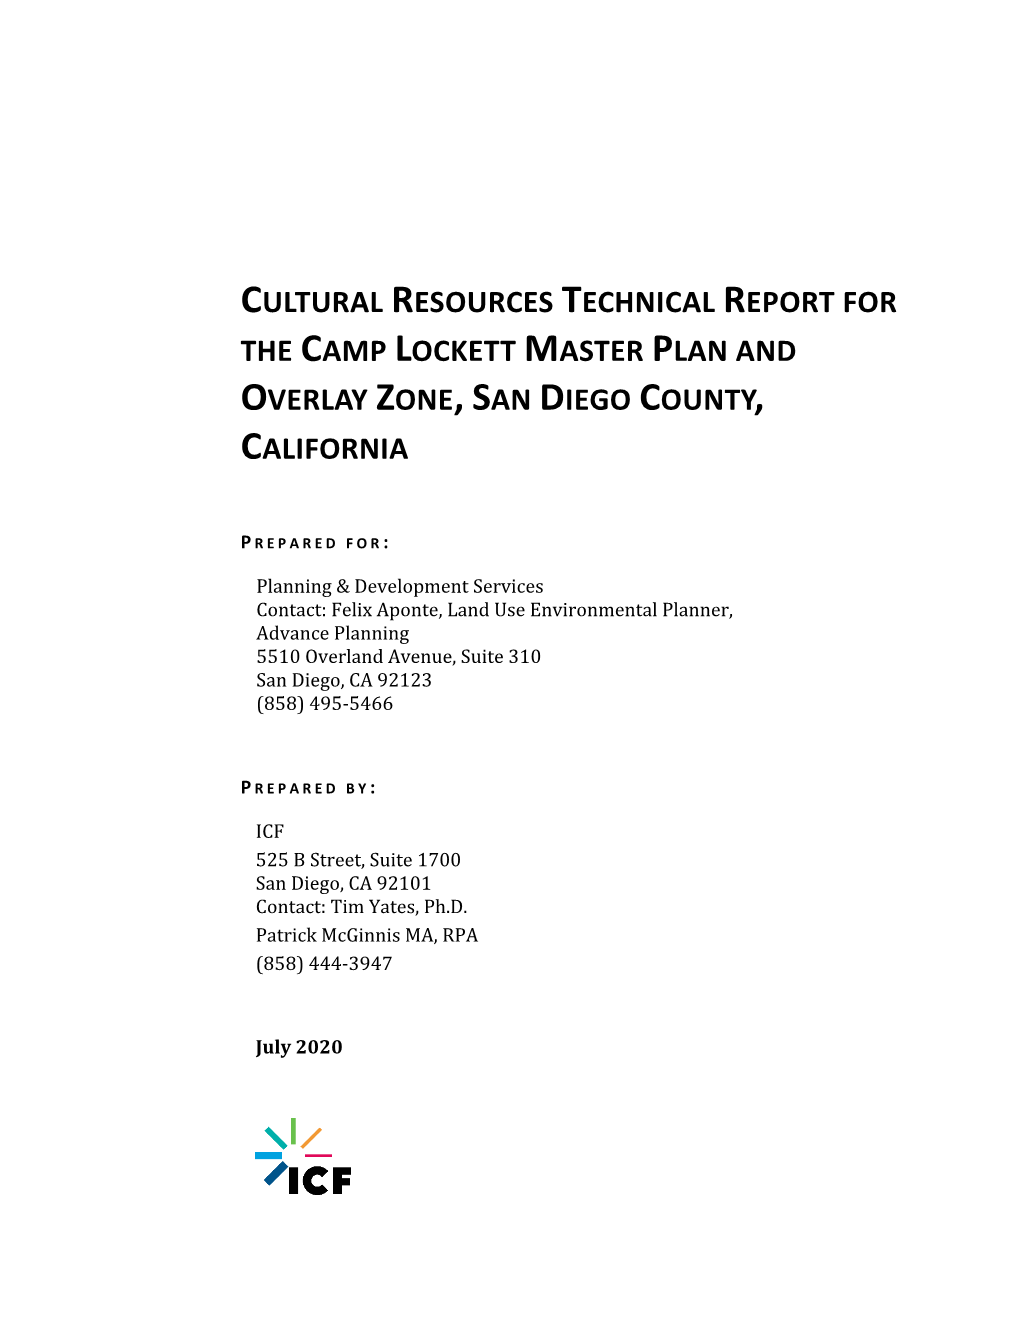 Cultural Resources Technical Report for the Camp Lockett Master Plan and Overlay Zone, San Diego County, California